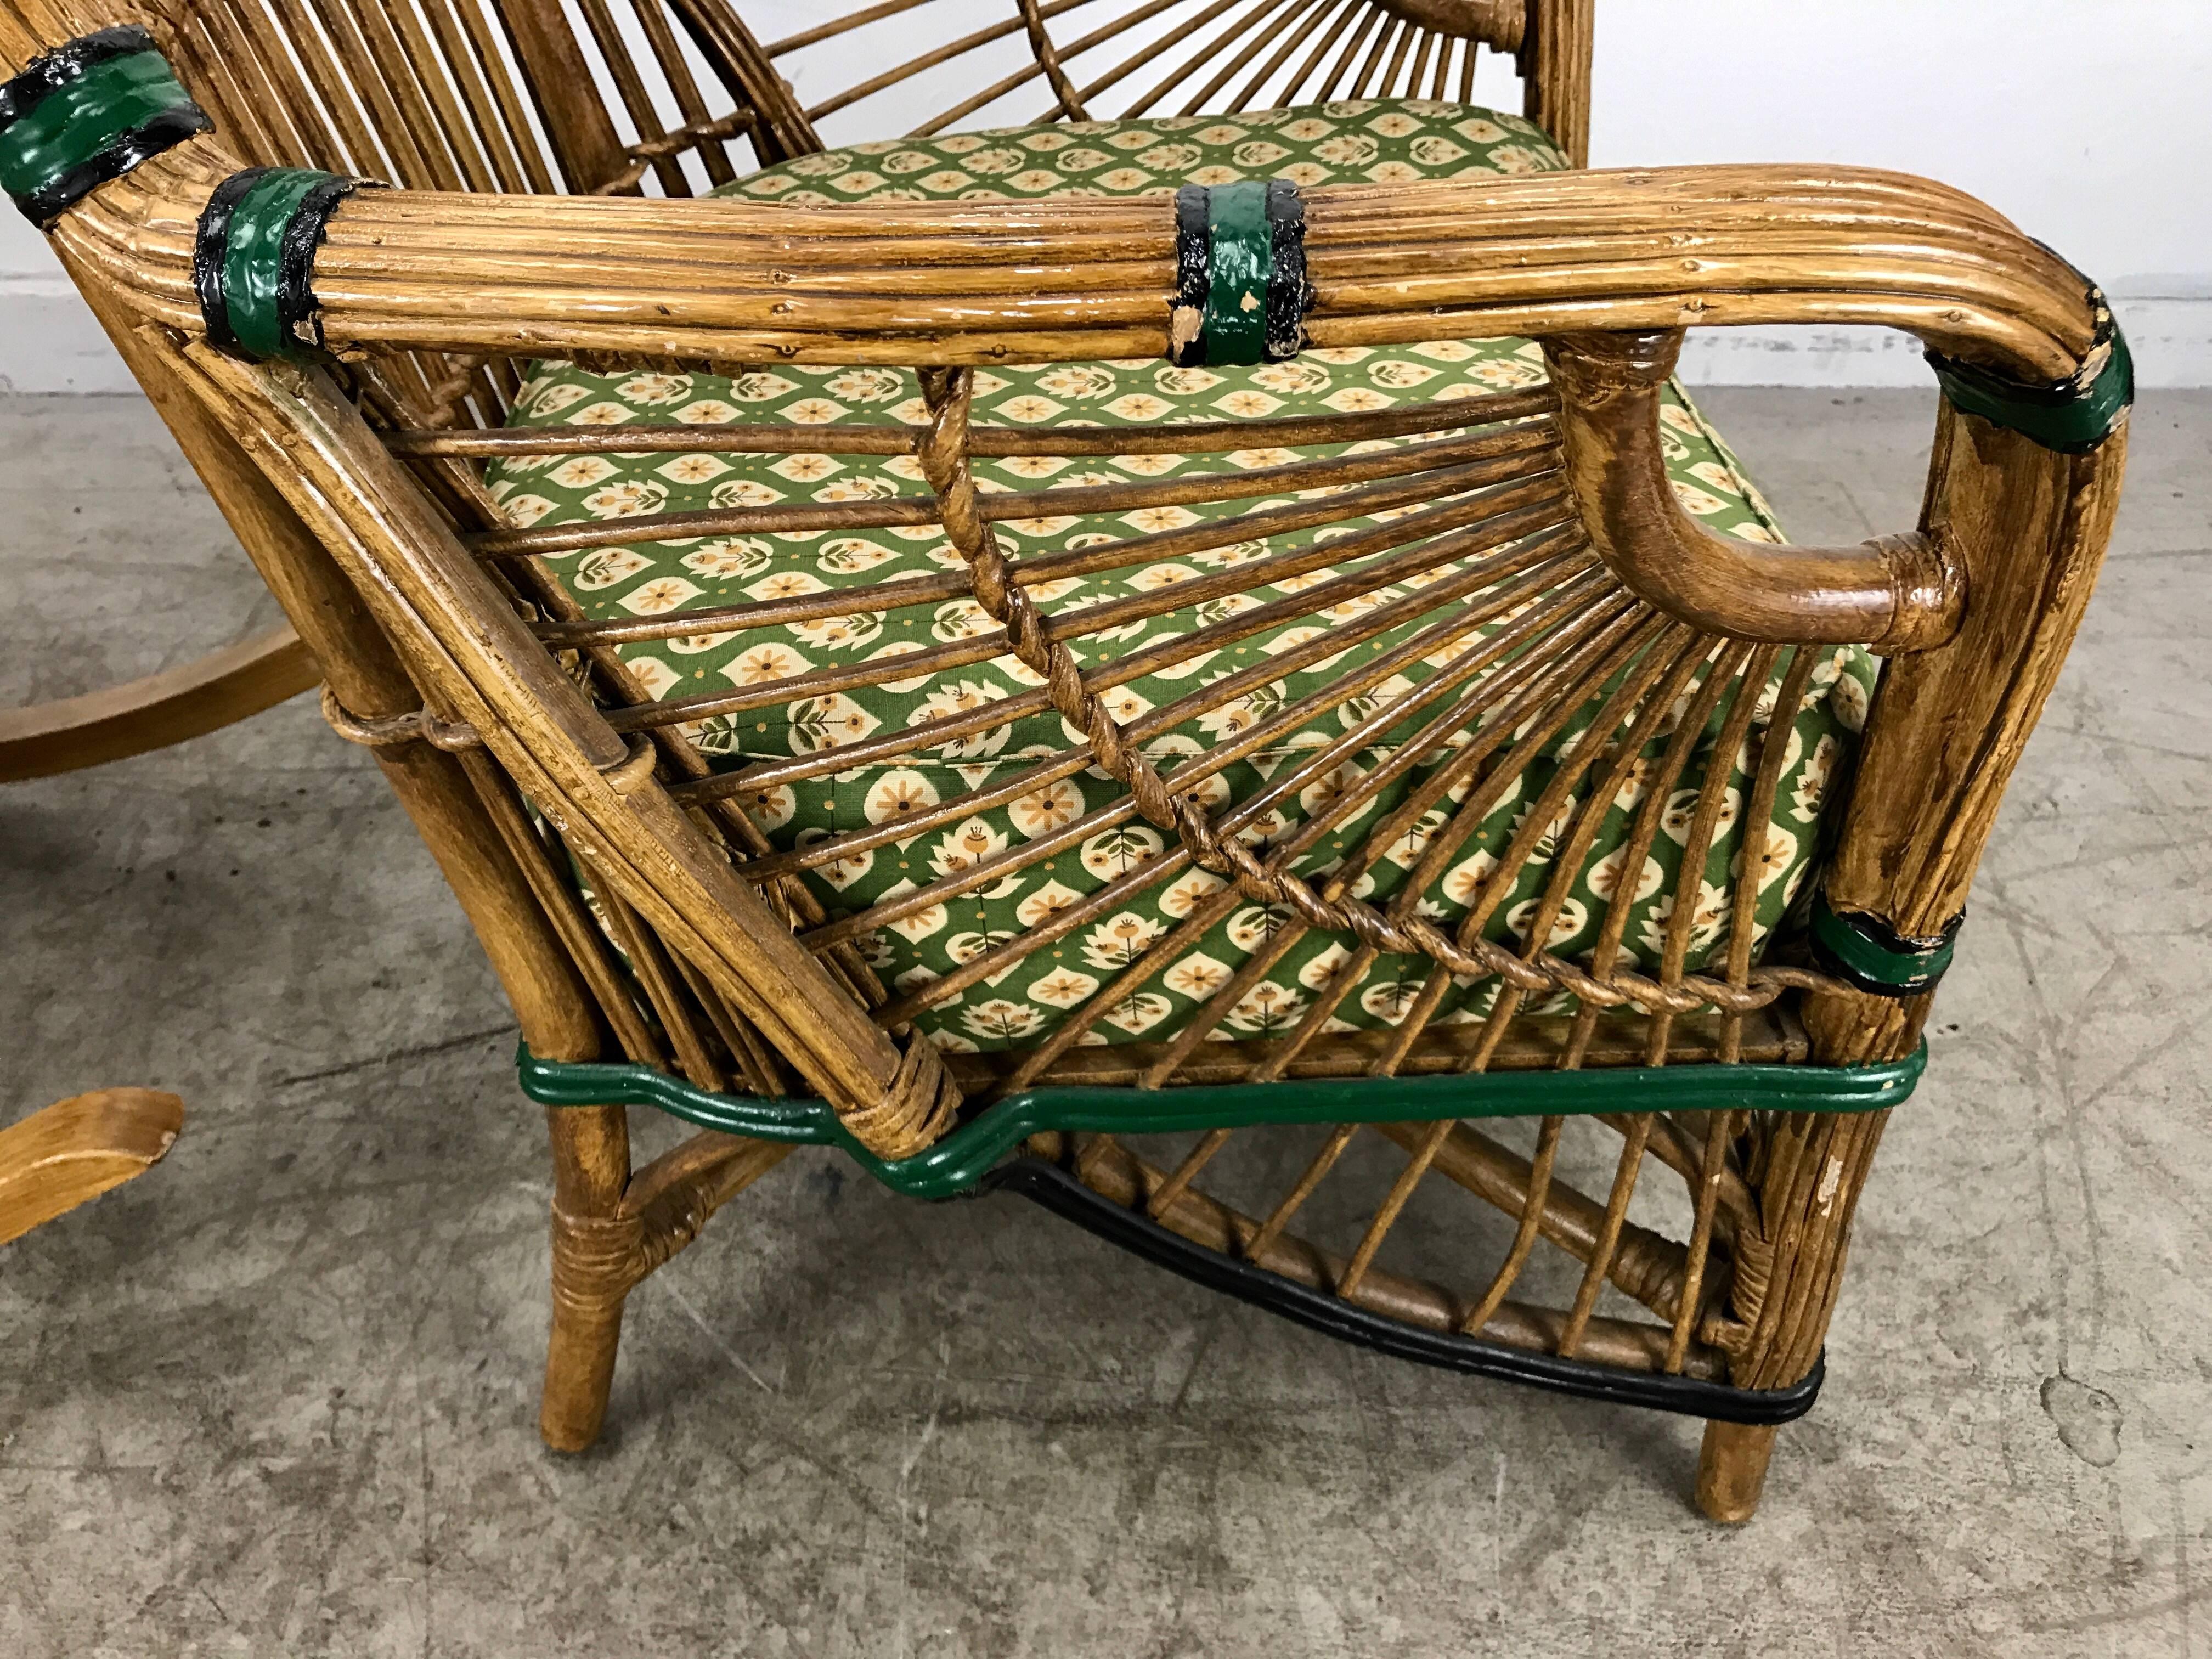 Stunning pair of Art Deco stick wicker/split reed chairs. One stationary, one rocker. Features natural finish with beautiful green and black paint detailing. Also retains original spring cushions, stunning Art Deco 